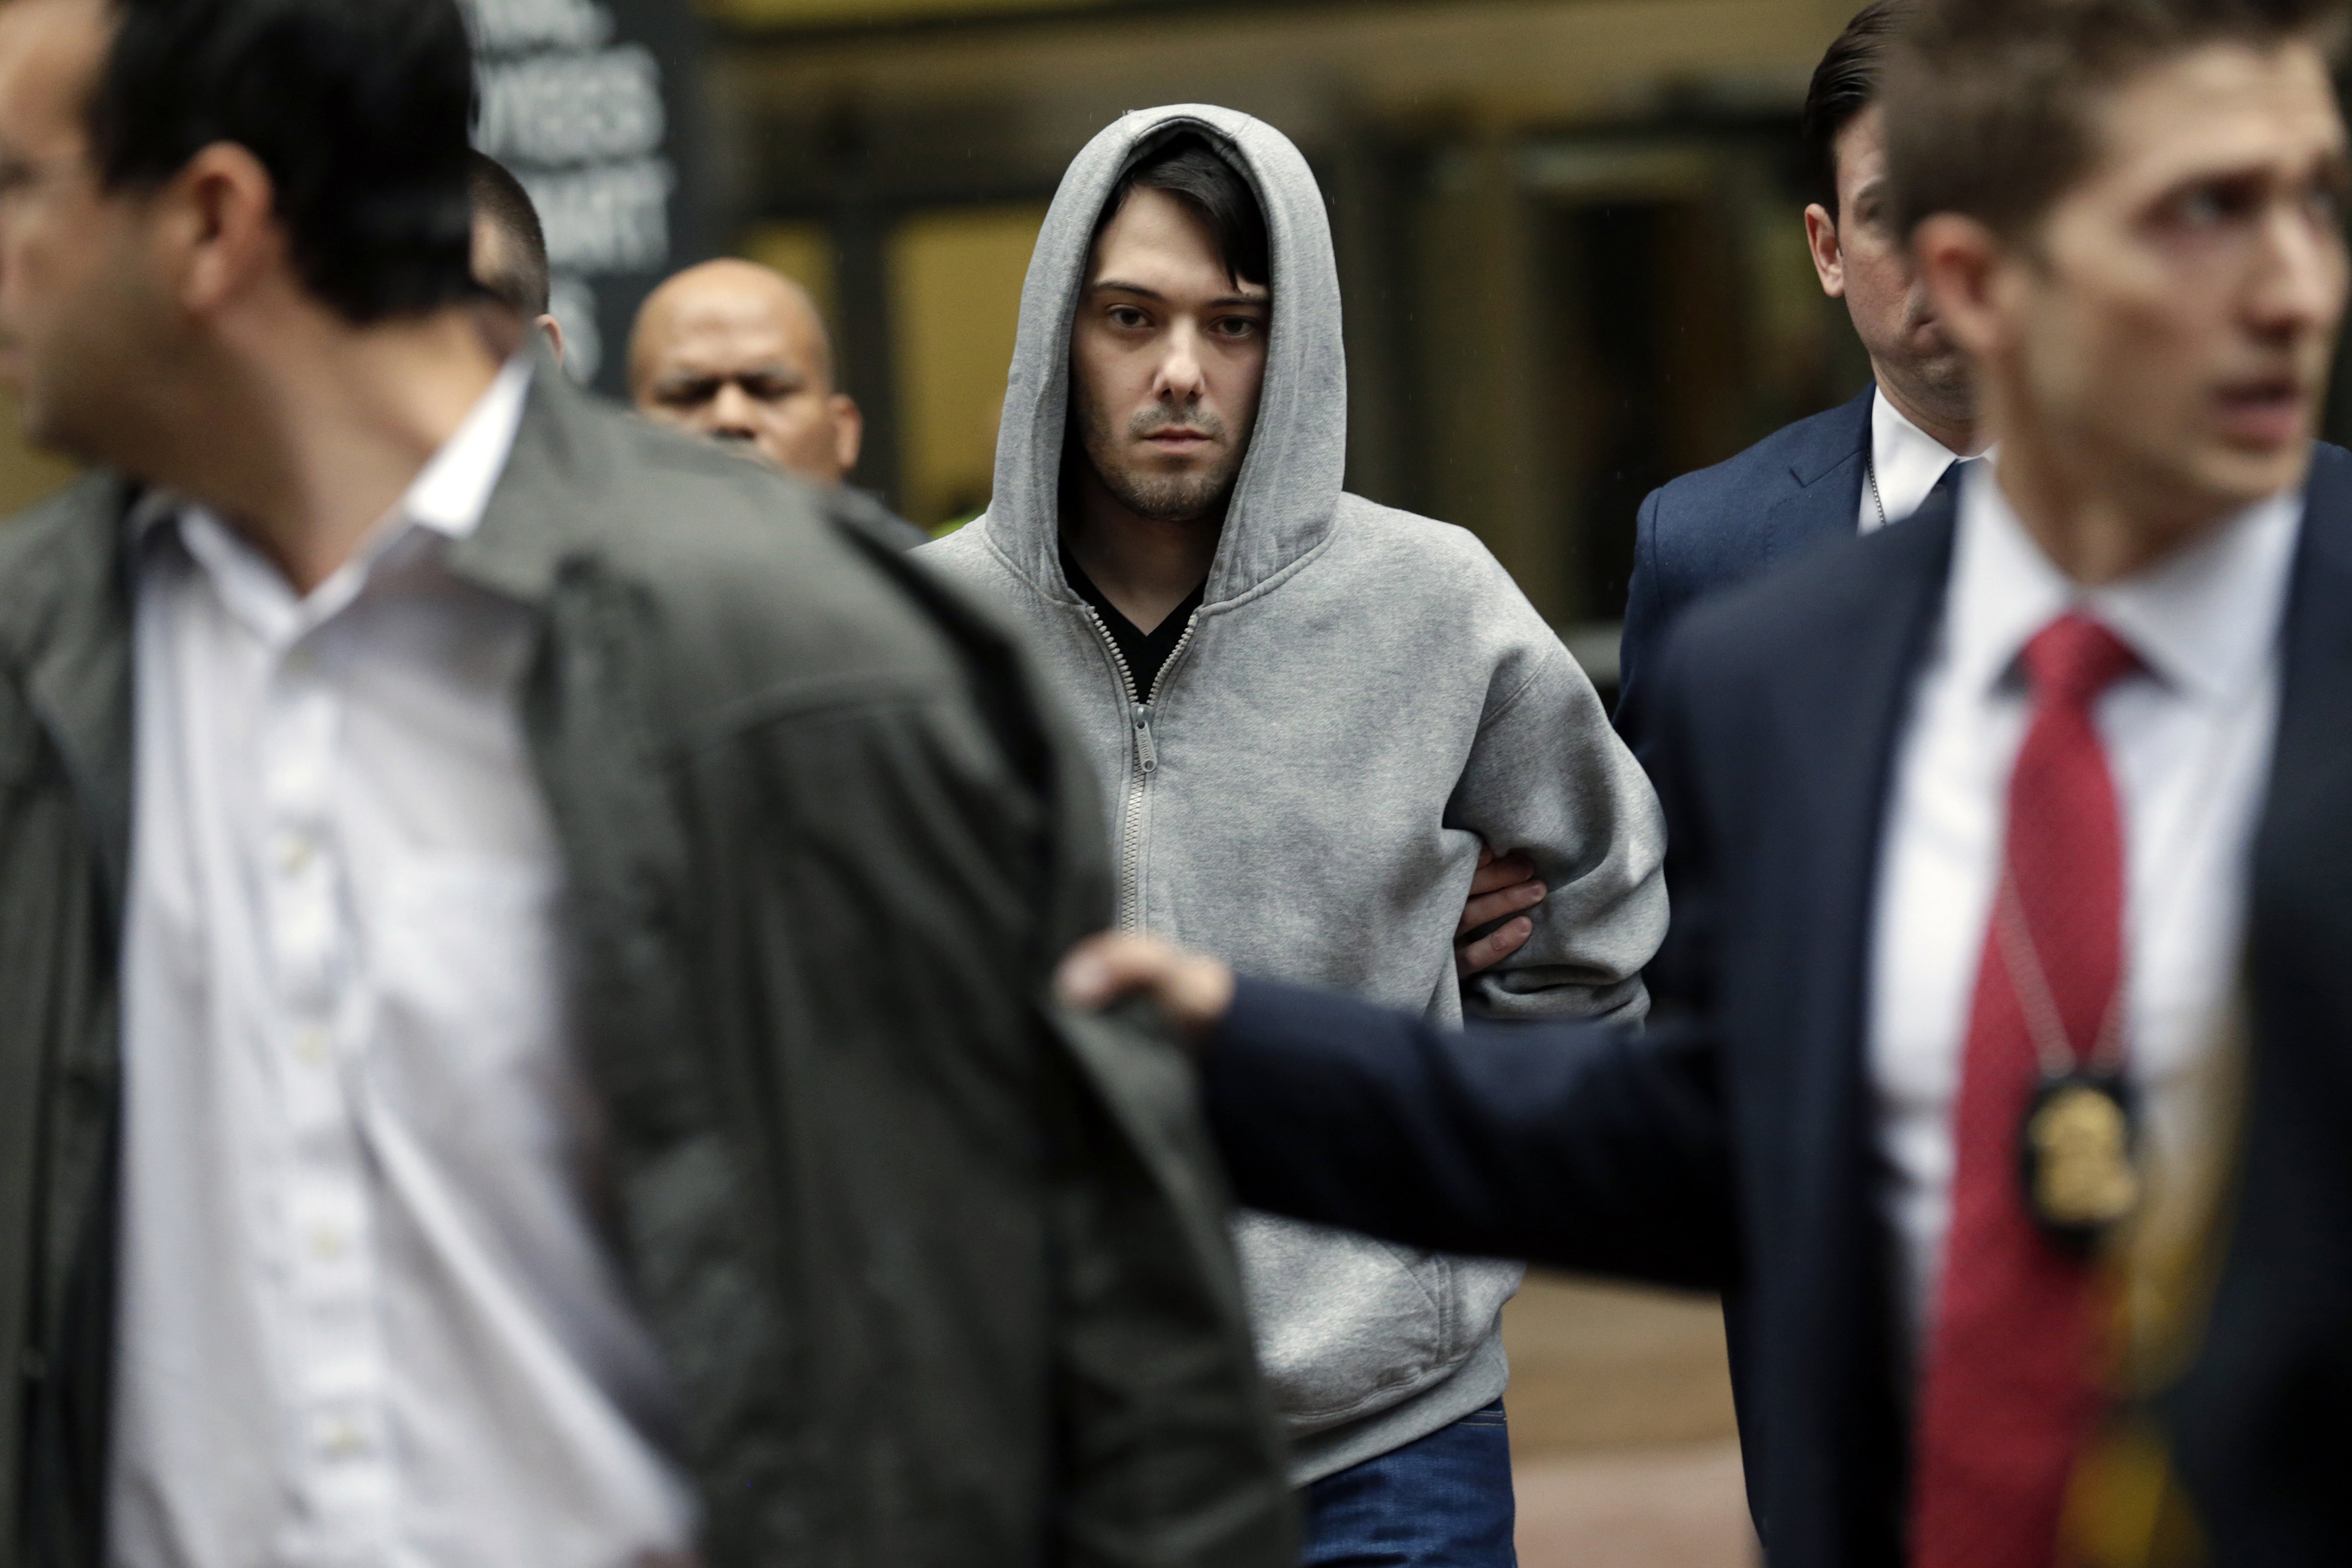 Martin Shkreli, chief executive officer of Turing Pharmaceuticals LLC, center, exits federal court in New York, U.S., on Thursday, Dec. 17, 2015. (Bloomberg&mdash;Bloomberg via Getty Images)